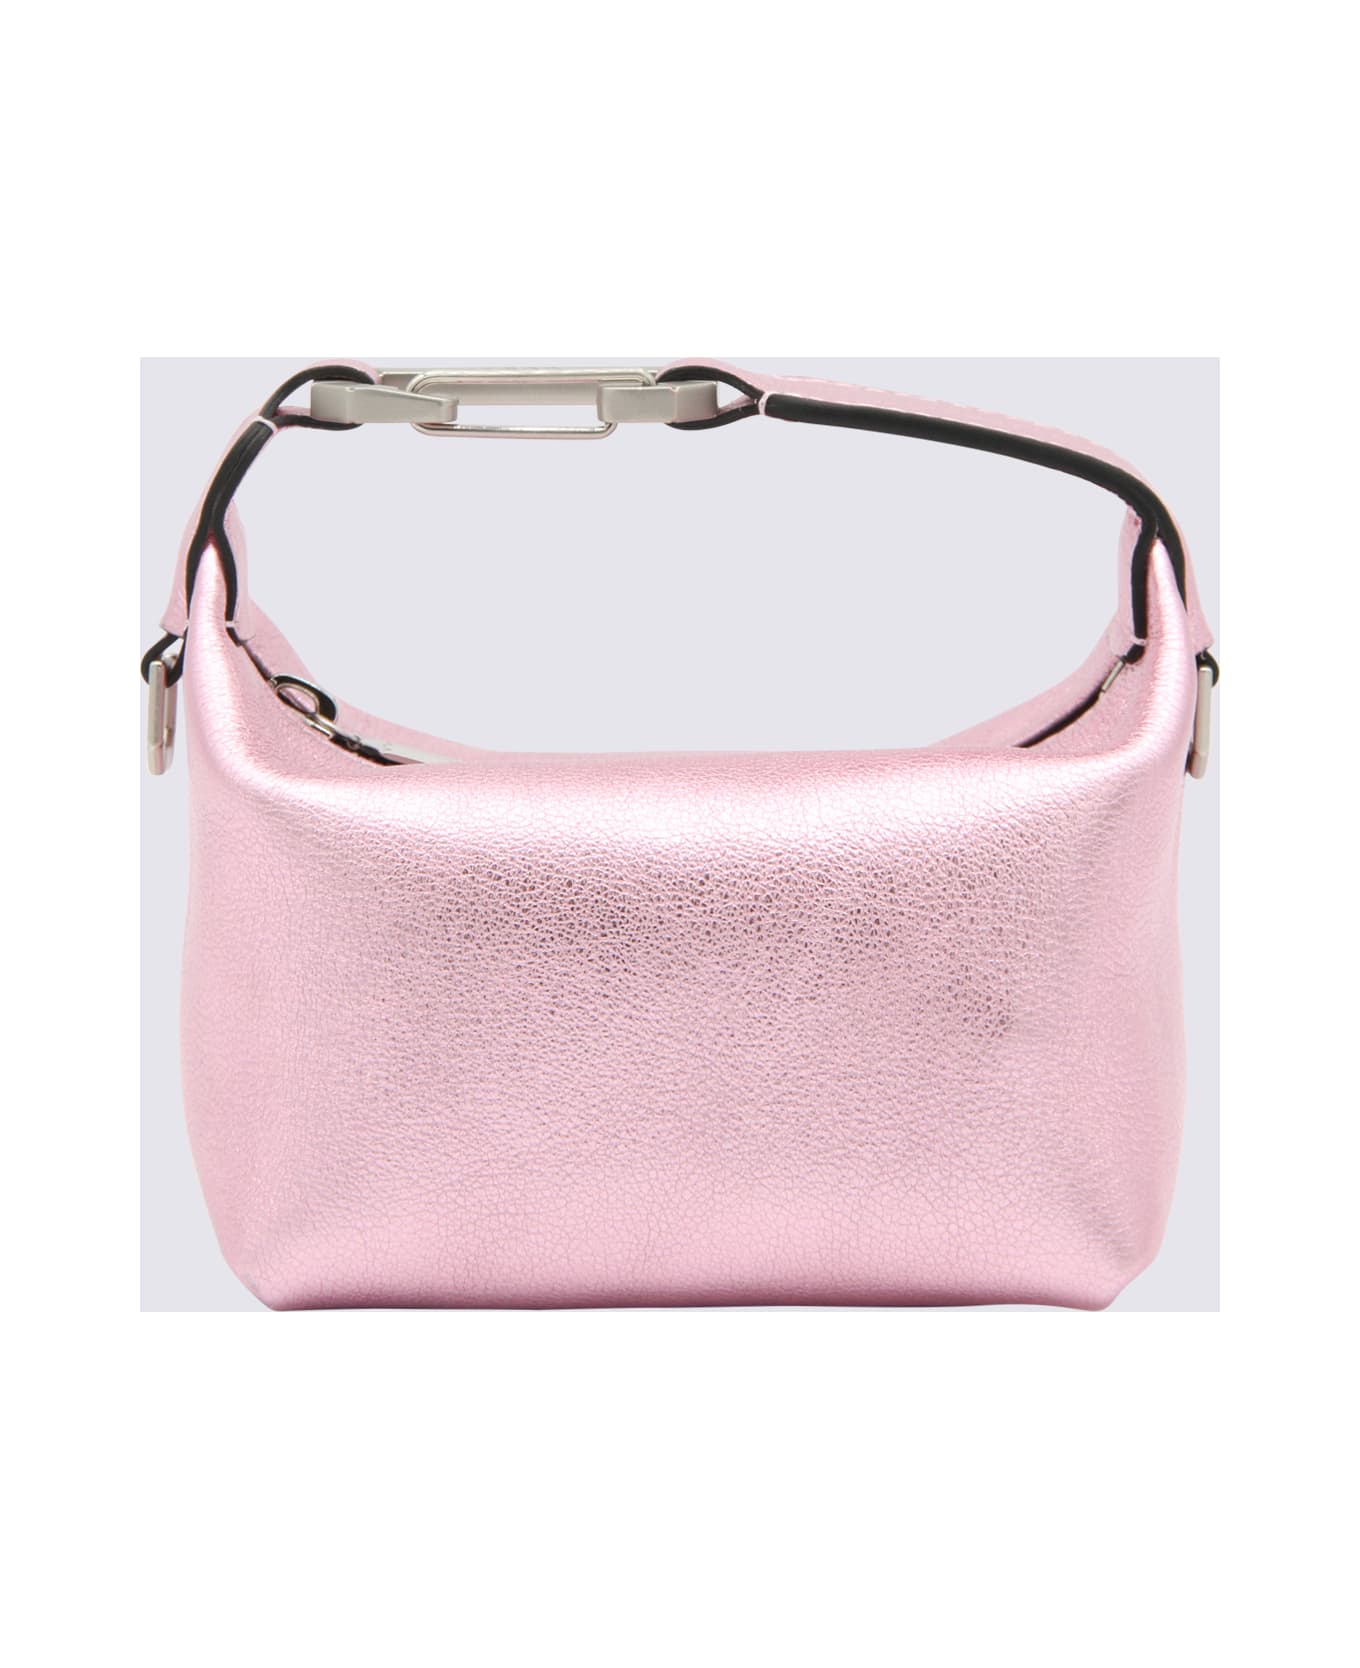 EÉRA Pink Leather Tiny Moon Tote Bag トートバッグ